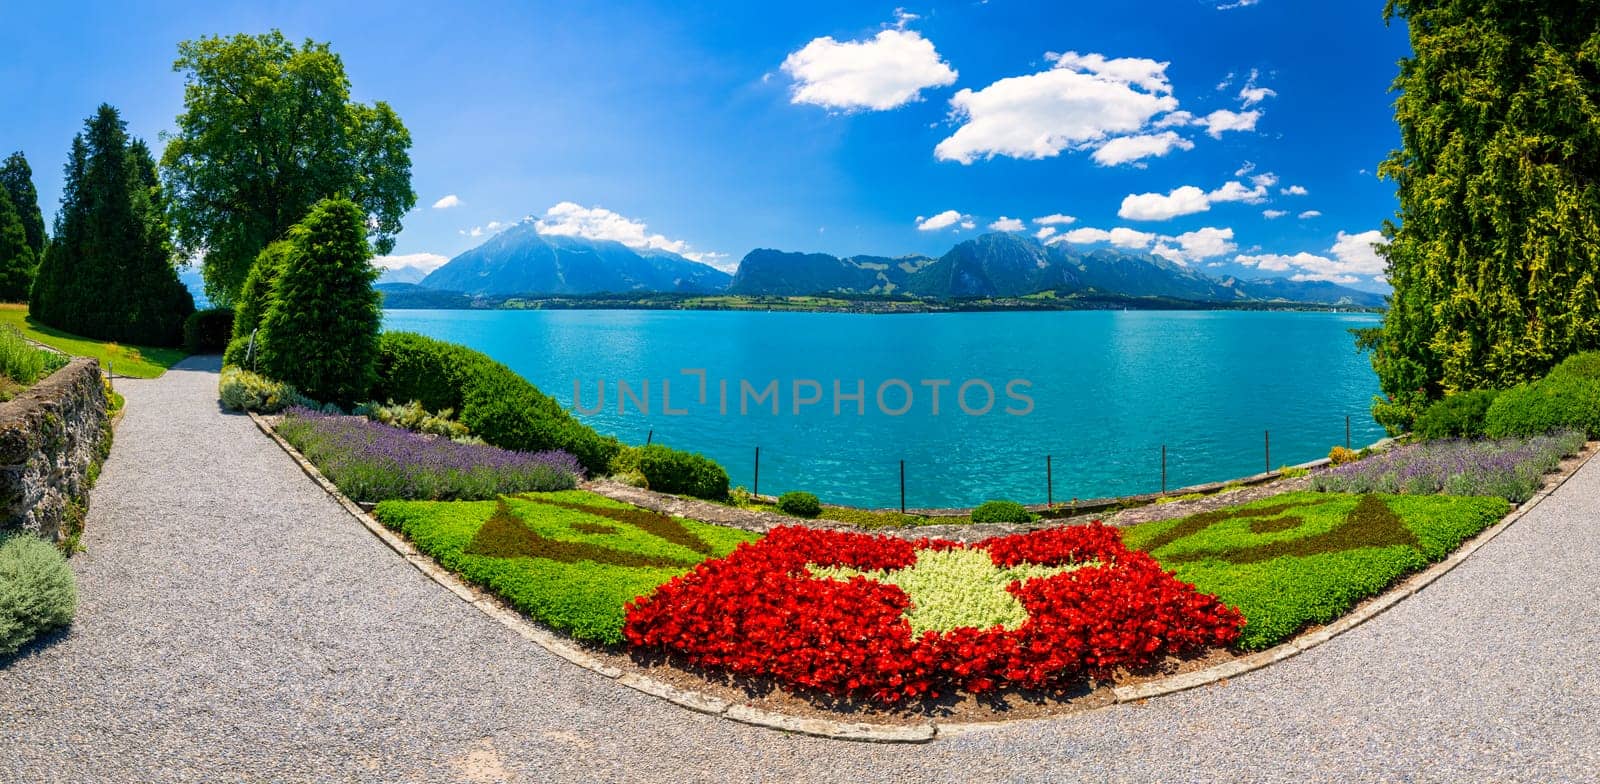 Flowerbed of the Swiss flag with boat cruise on the Thun lake and Alps mountains, Oberhofen, Switzerland. Swiss flag made of flowers and passenger cruise boat, Lake Thun, Switzerland.